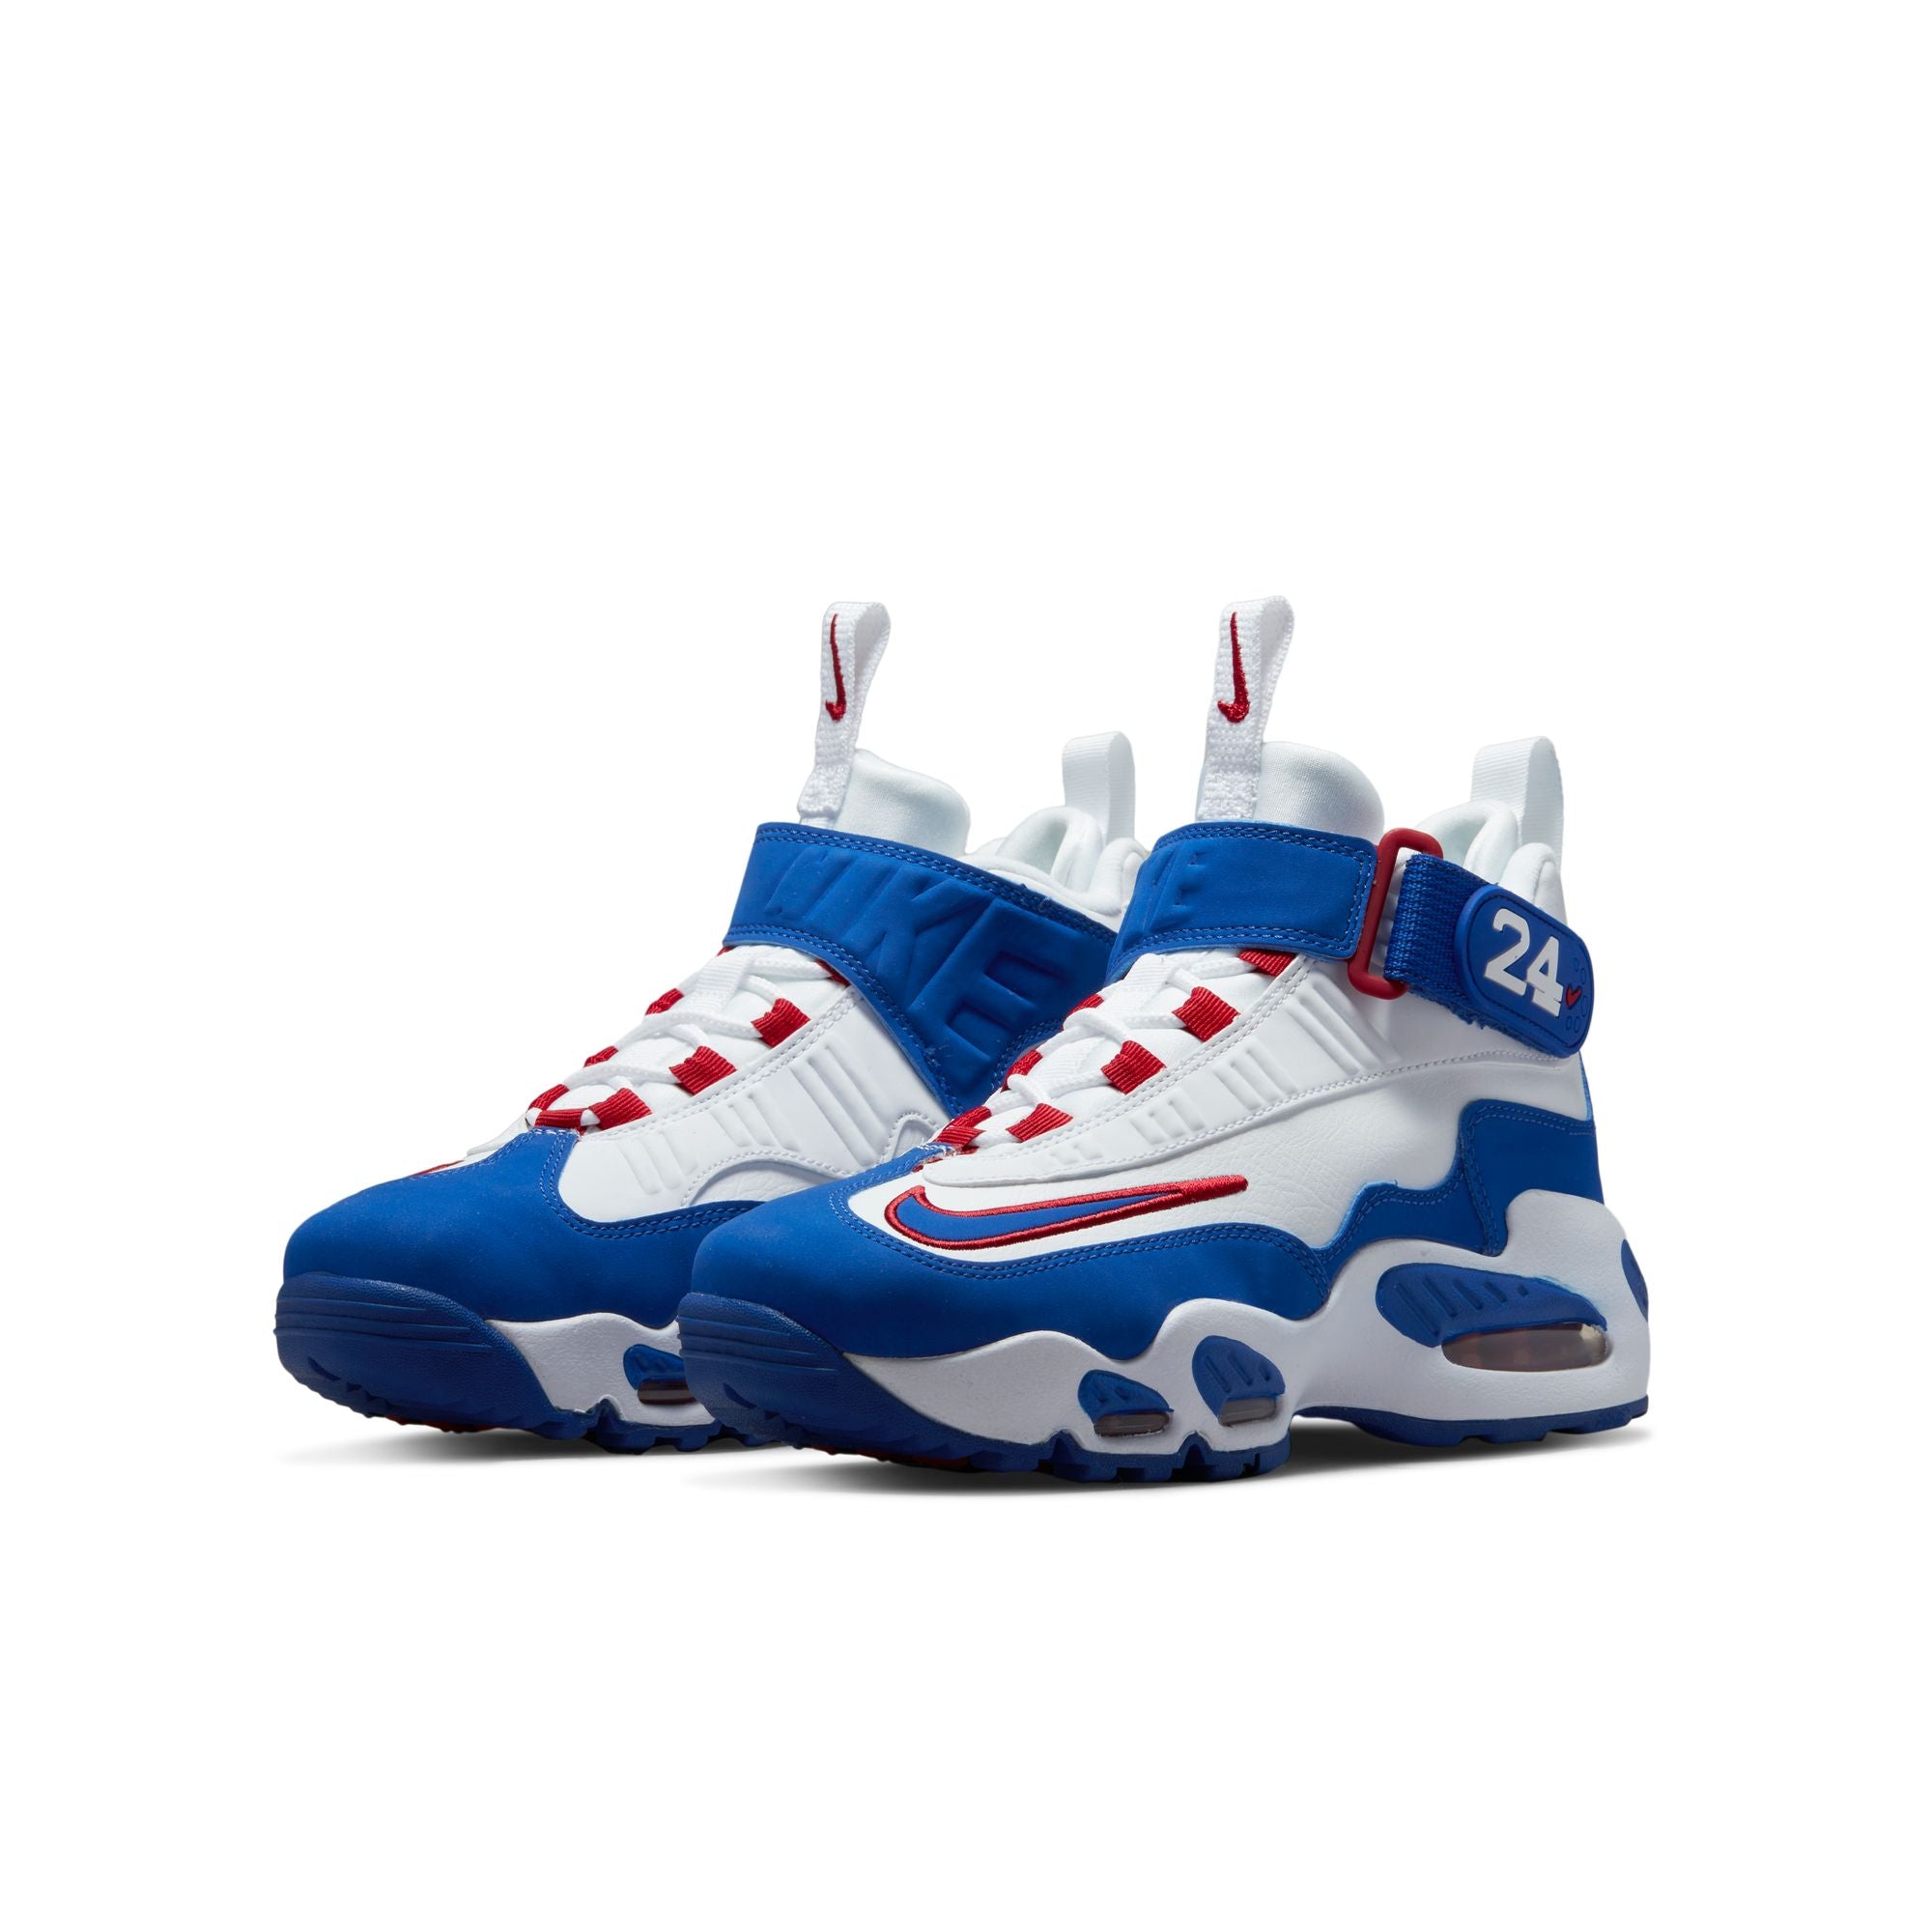 Buy the Nike Air Griffey Max 1 Varsity Royal Right Here